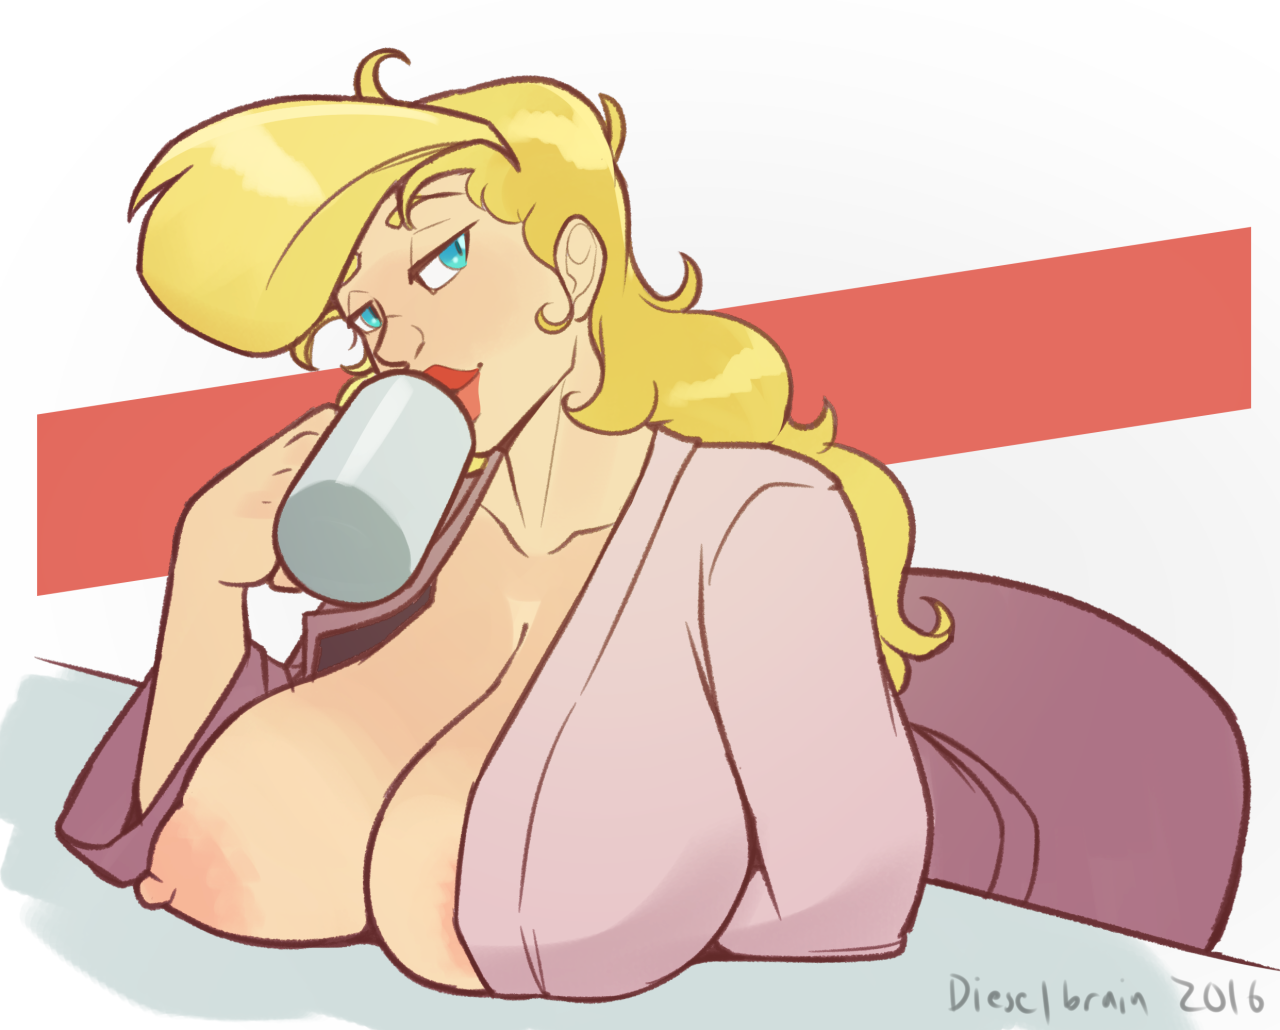 jamesab-smut:  dieselbrain:  a commission for Jamesab’s oc Stephanie in a revealing